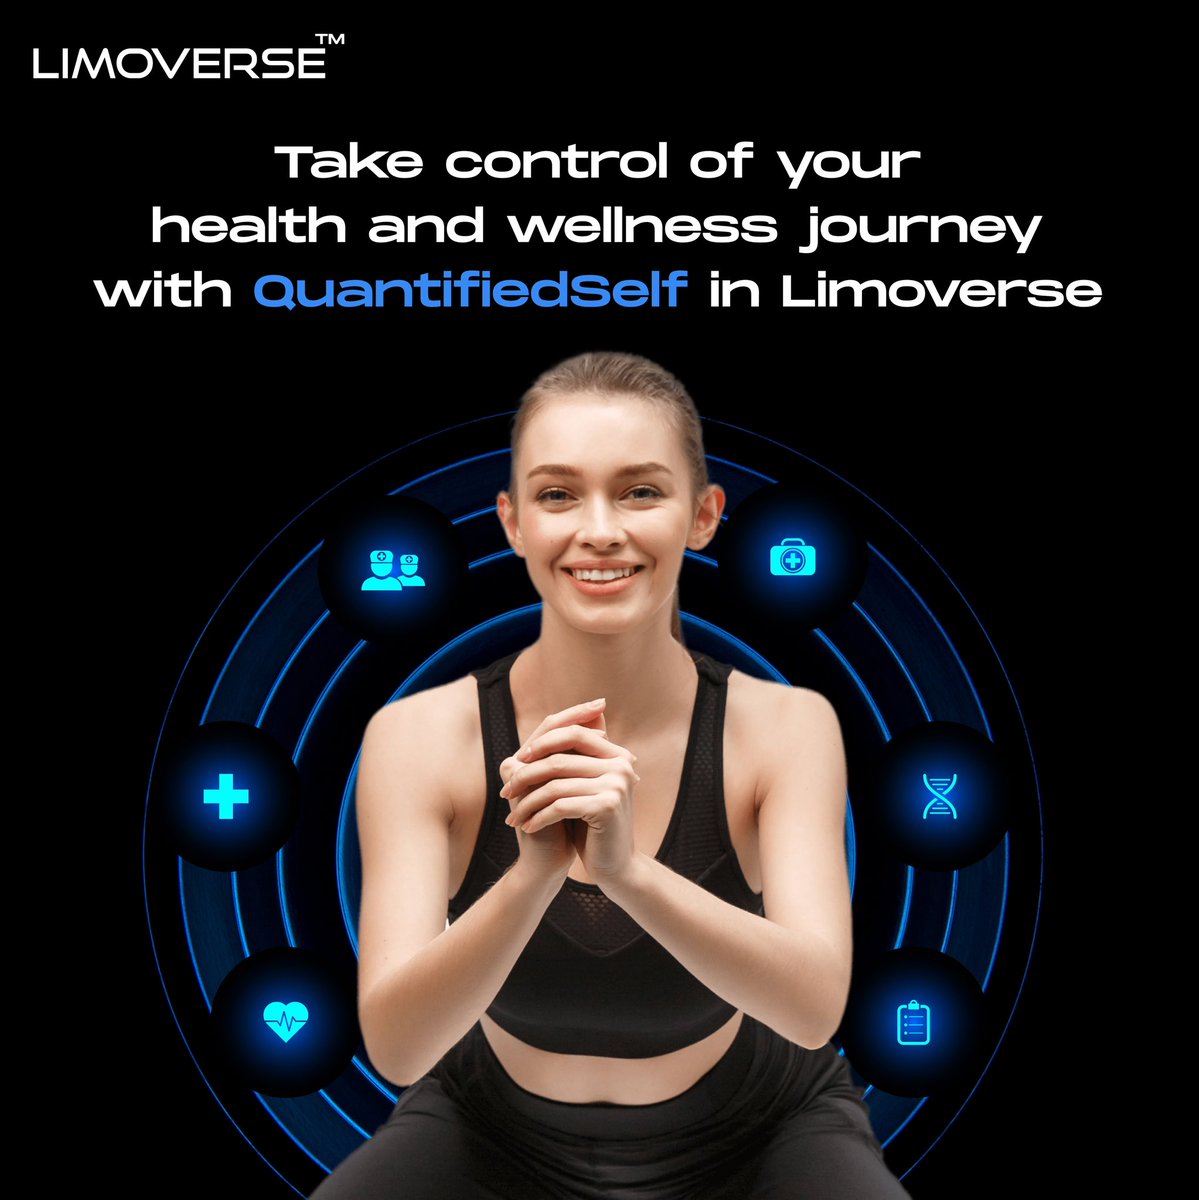 Discover the power of self-optimization with #QuantifiedSelf in #Limoverse - the ultimate tool for hacking your health and well-being💫

Whether it's tracking your fitness or monitoring your body, our cutting-edge IoT devices help you take charge of your wellness journey🙌

#IoT